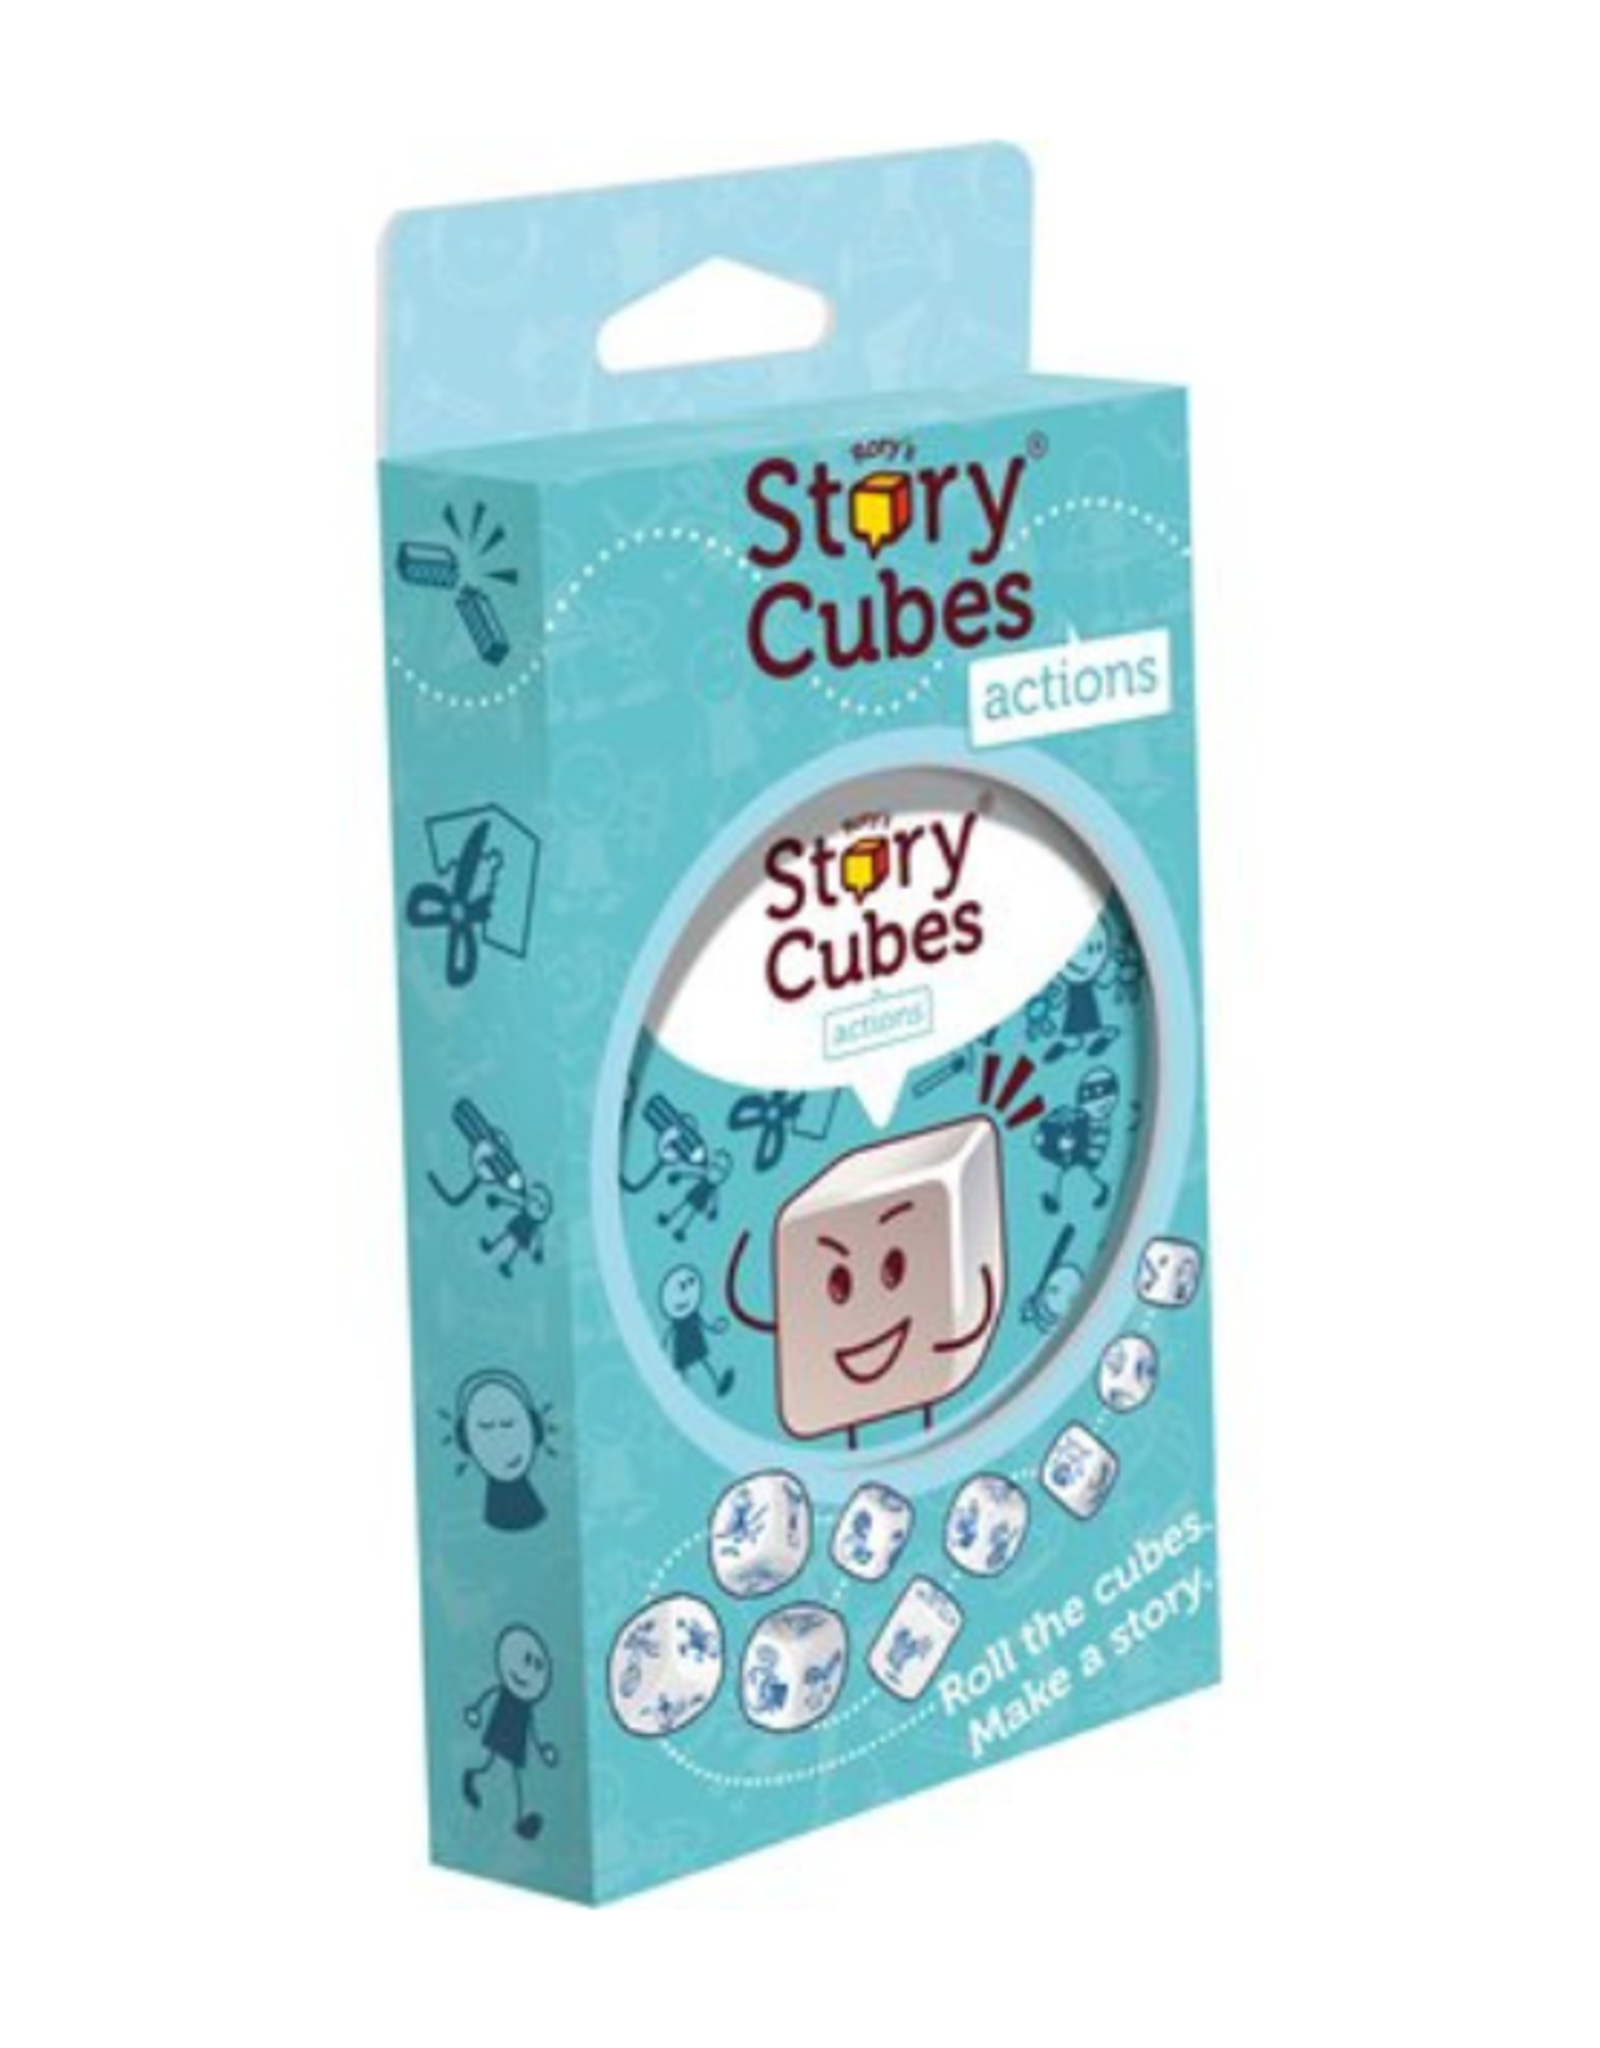 Zygo Matic Zygo Matic - Rory's Story Cubes Actions